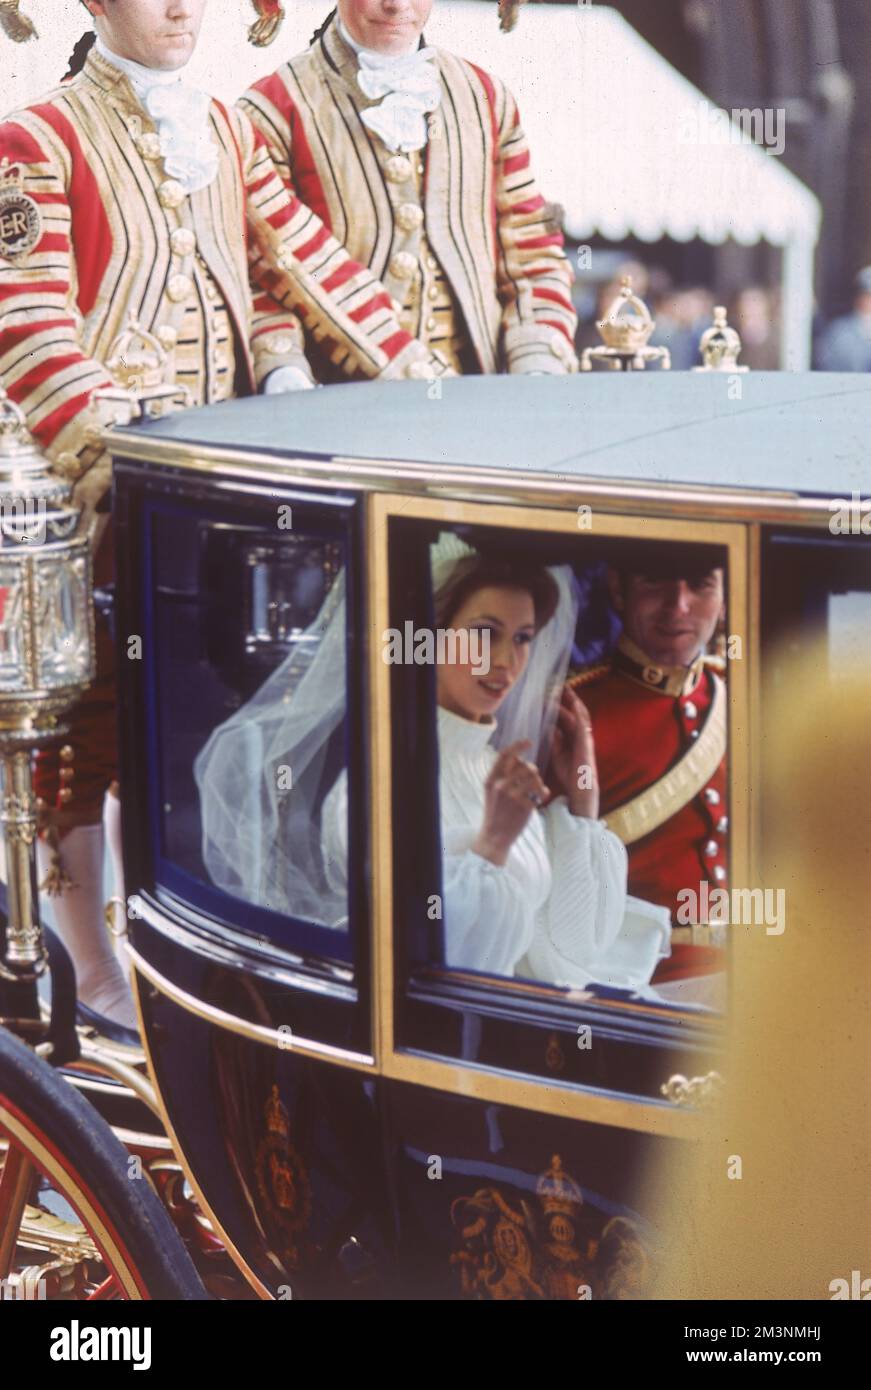 The Marriage of Princess Anne to Mark Phillips, a Lieutenant in the 1st Queen's Dragoon Guards, at Westminster Abbey on 14th November 1973. The couple leave the Abbey in a horse-drawn carriage.     Date: 1973 Stock Photo